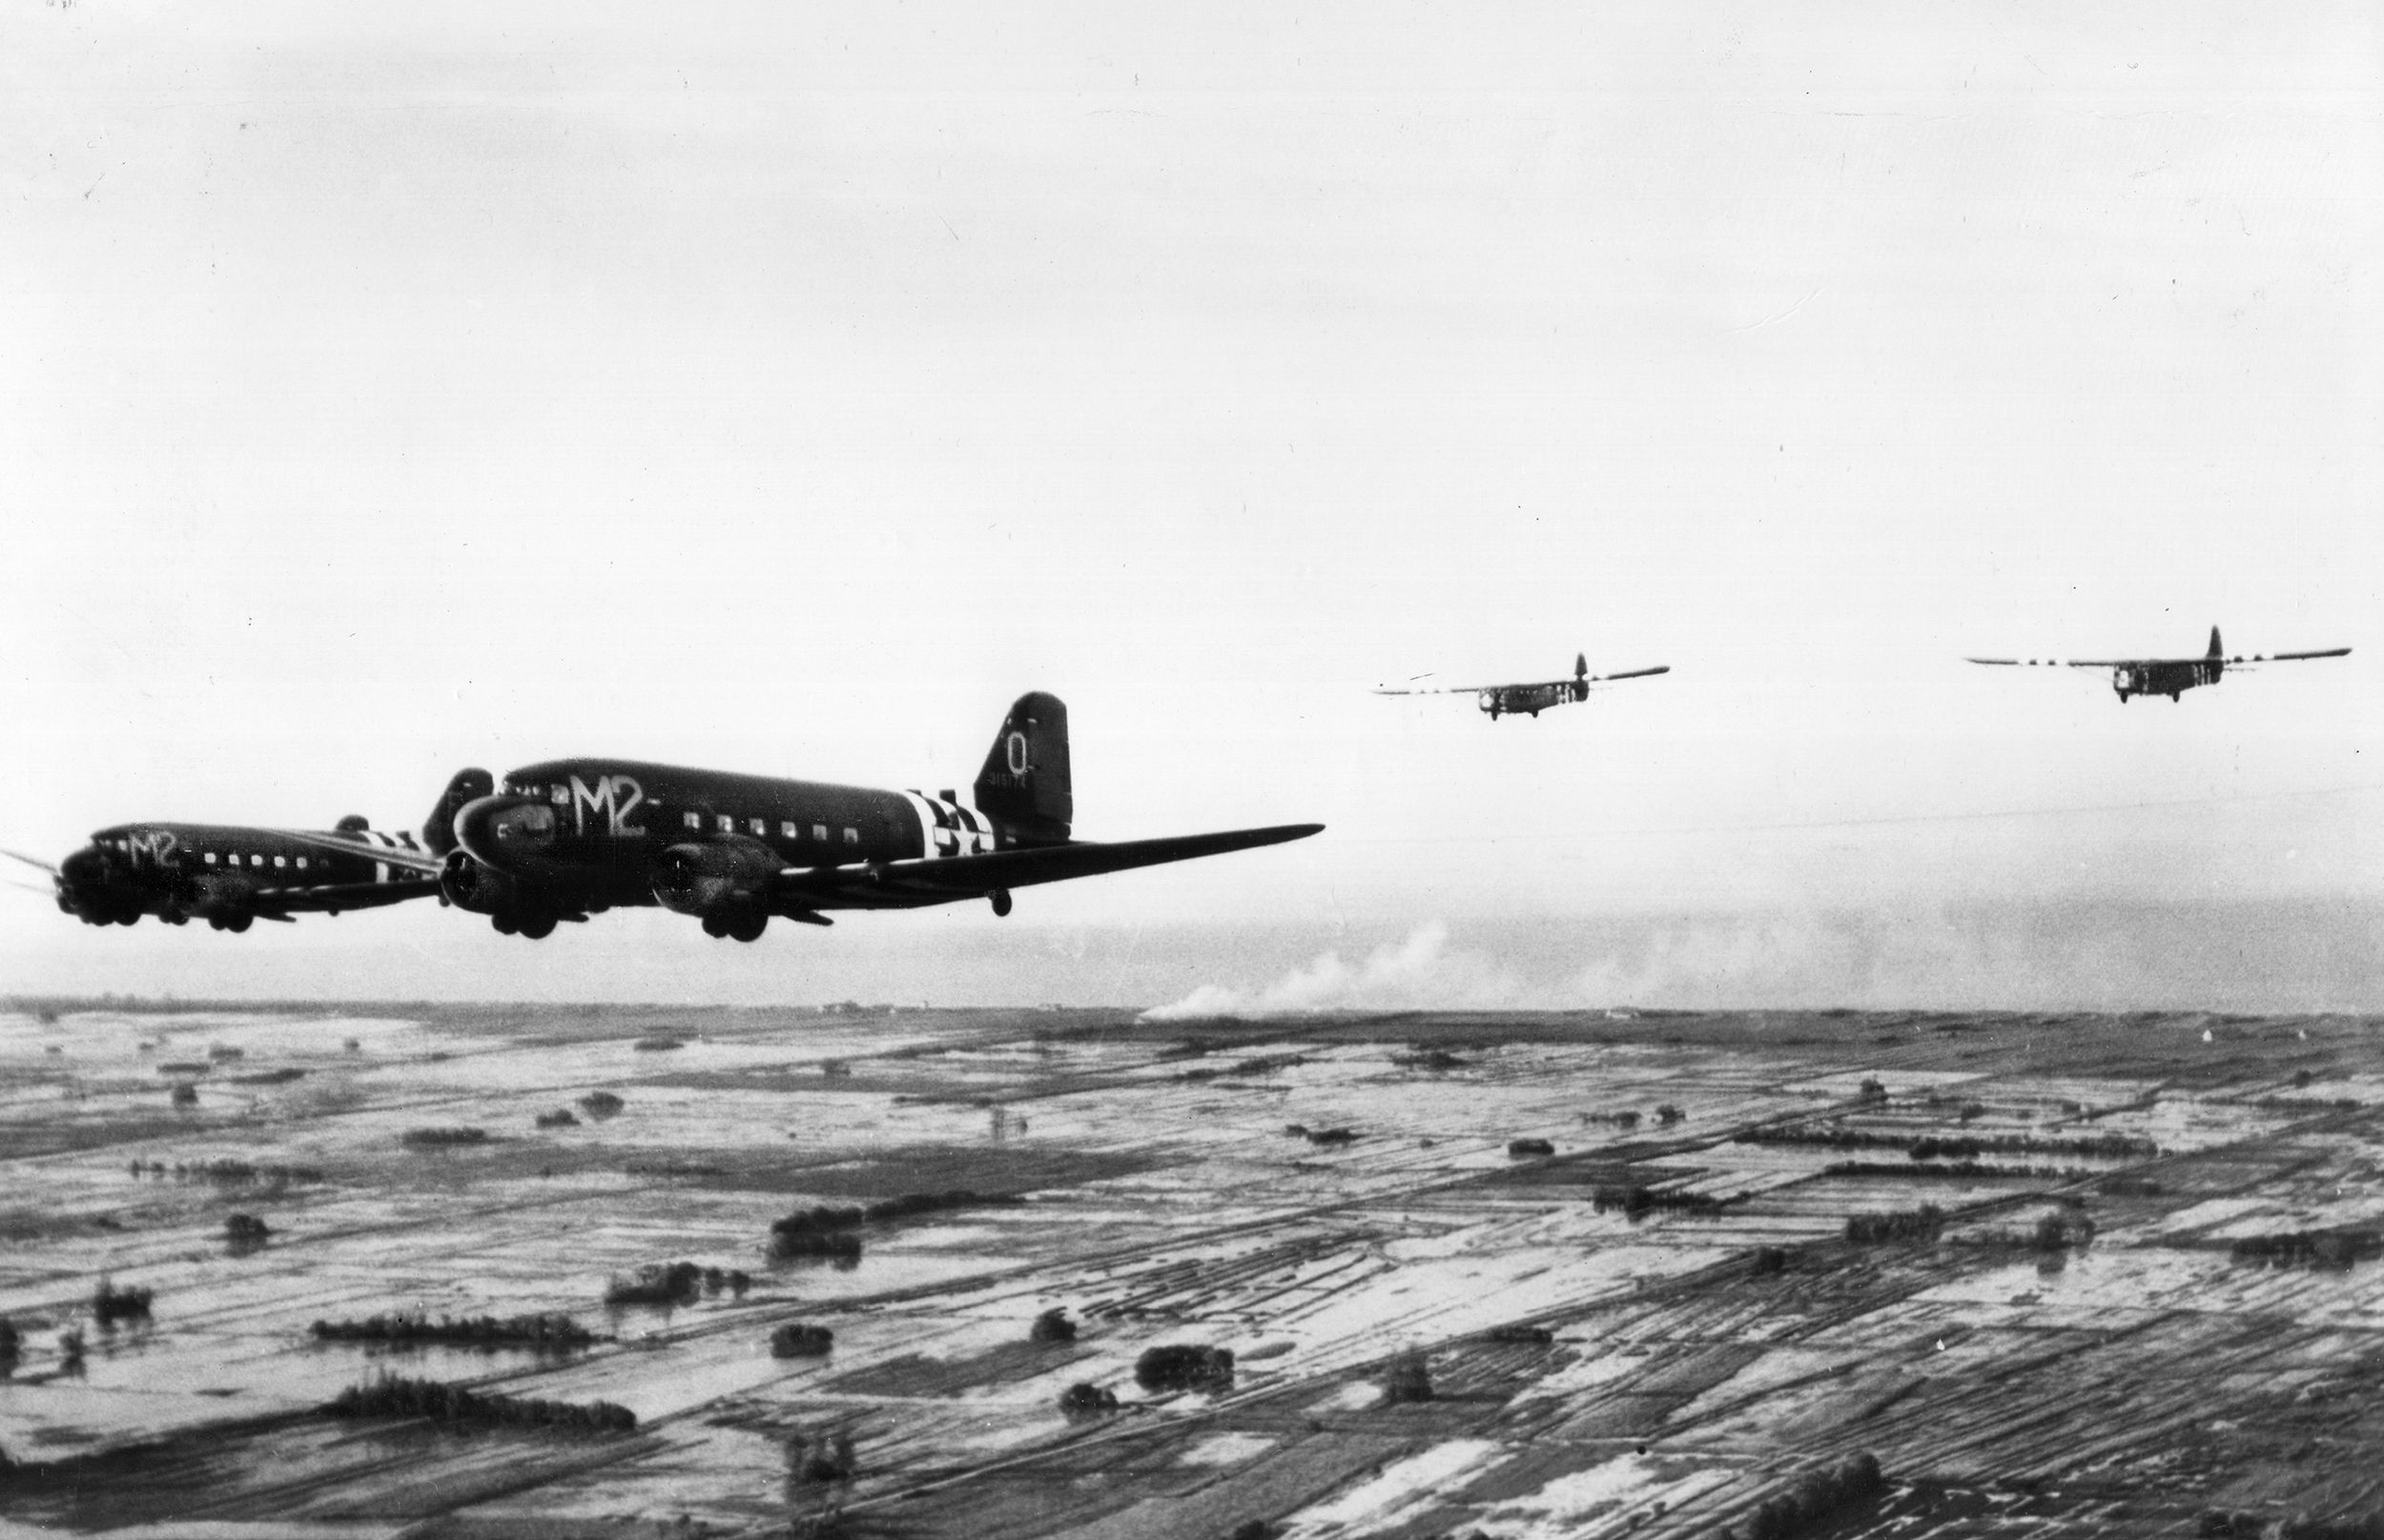 Two C-47s tow gliders to landing zones during the Normandy invasion, June 6, 1944. Nearly 900 British and American gliders were employed during the operation. 